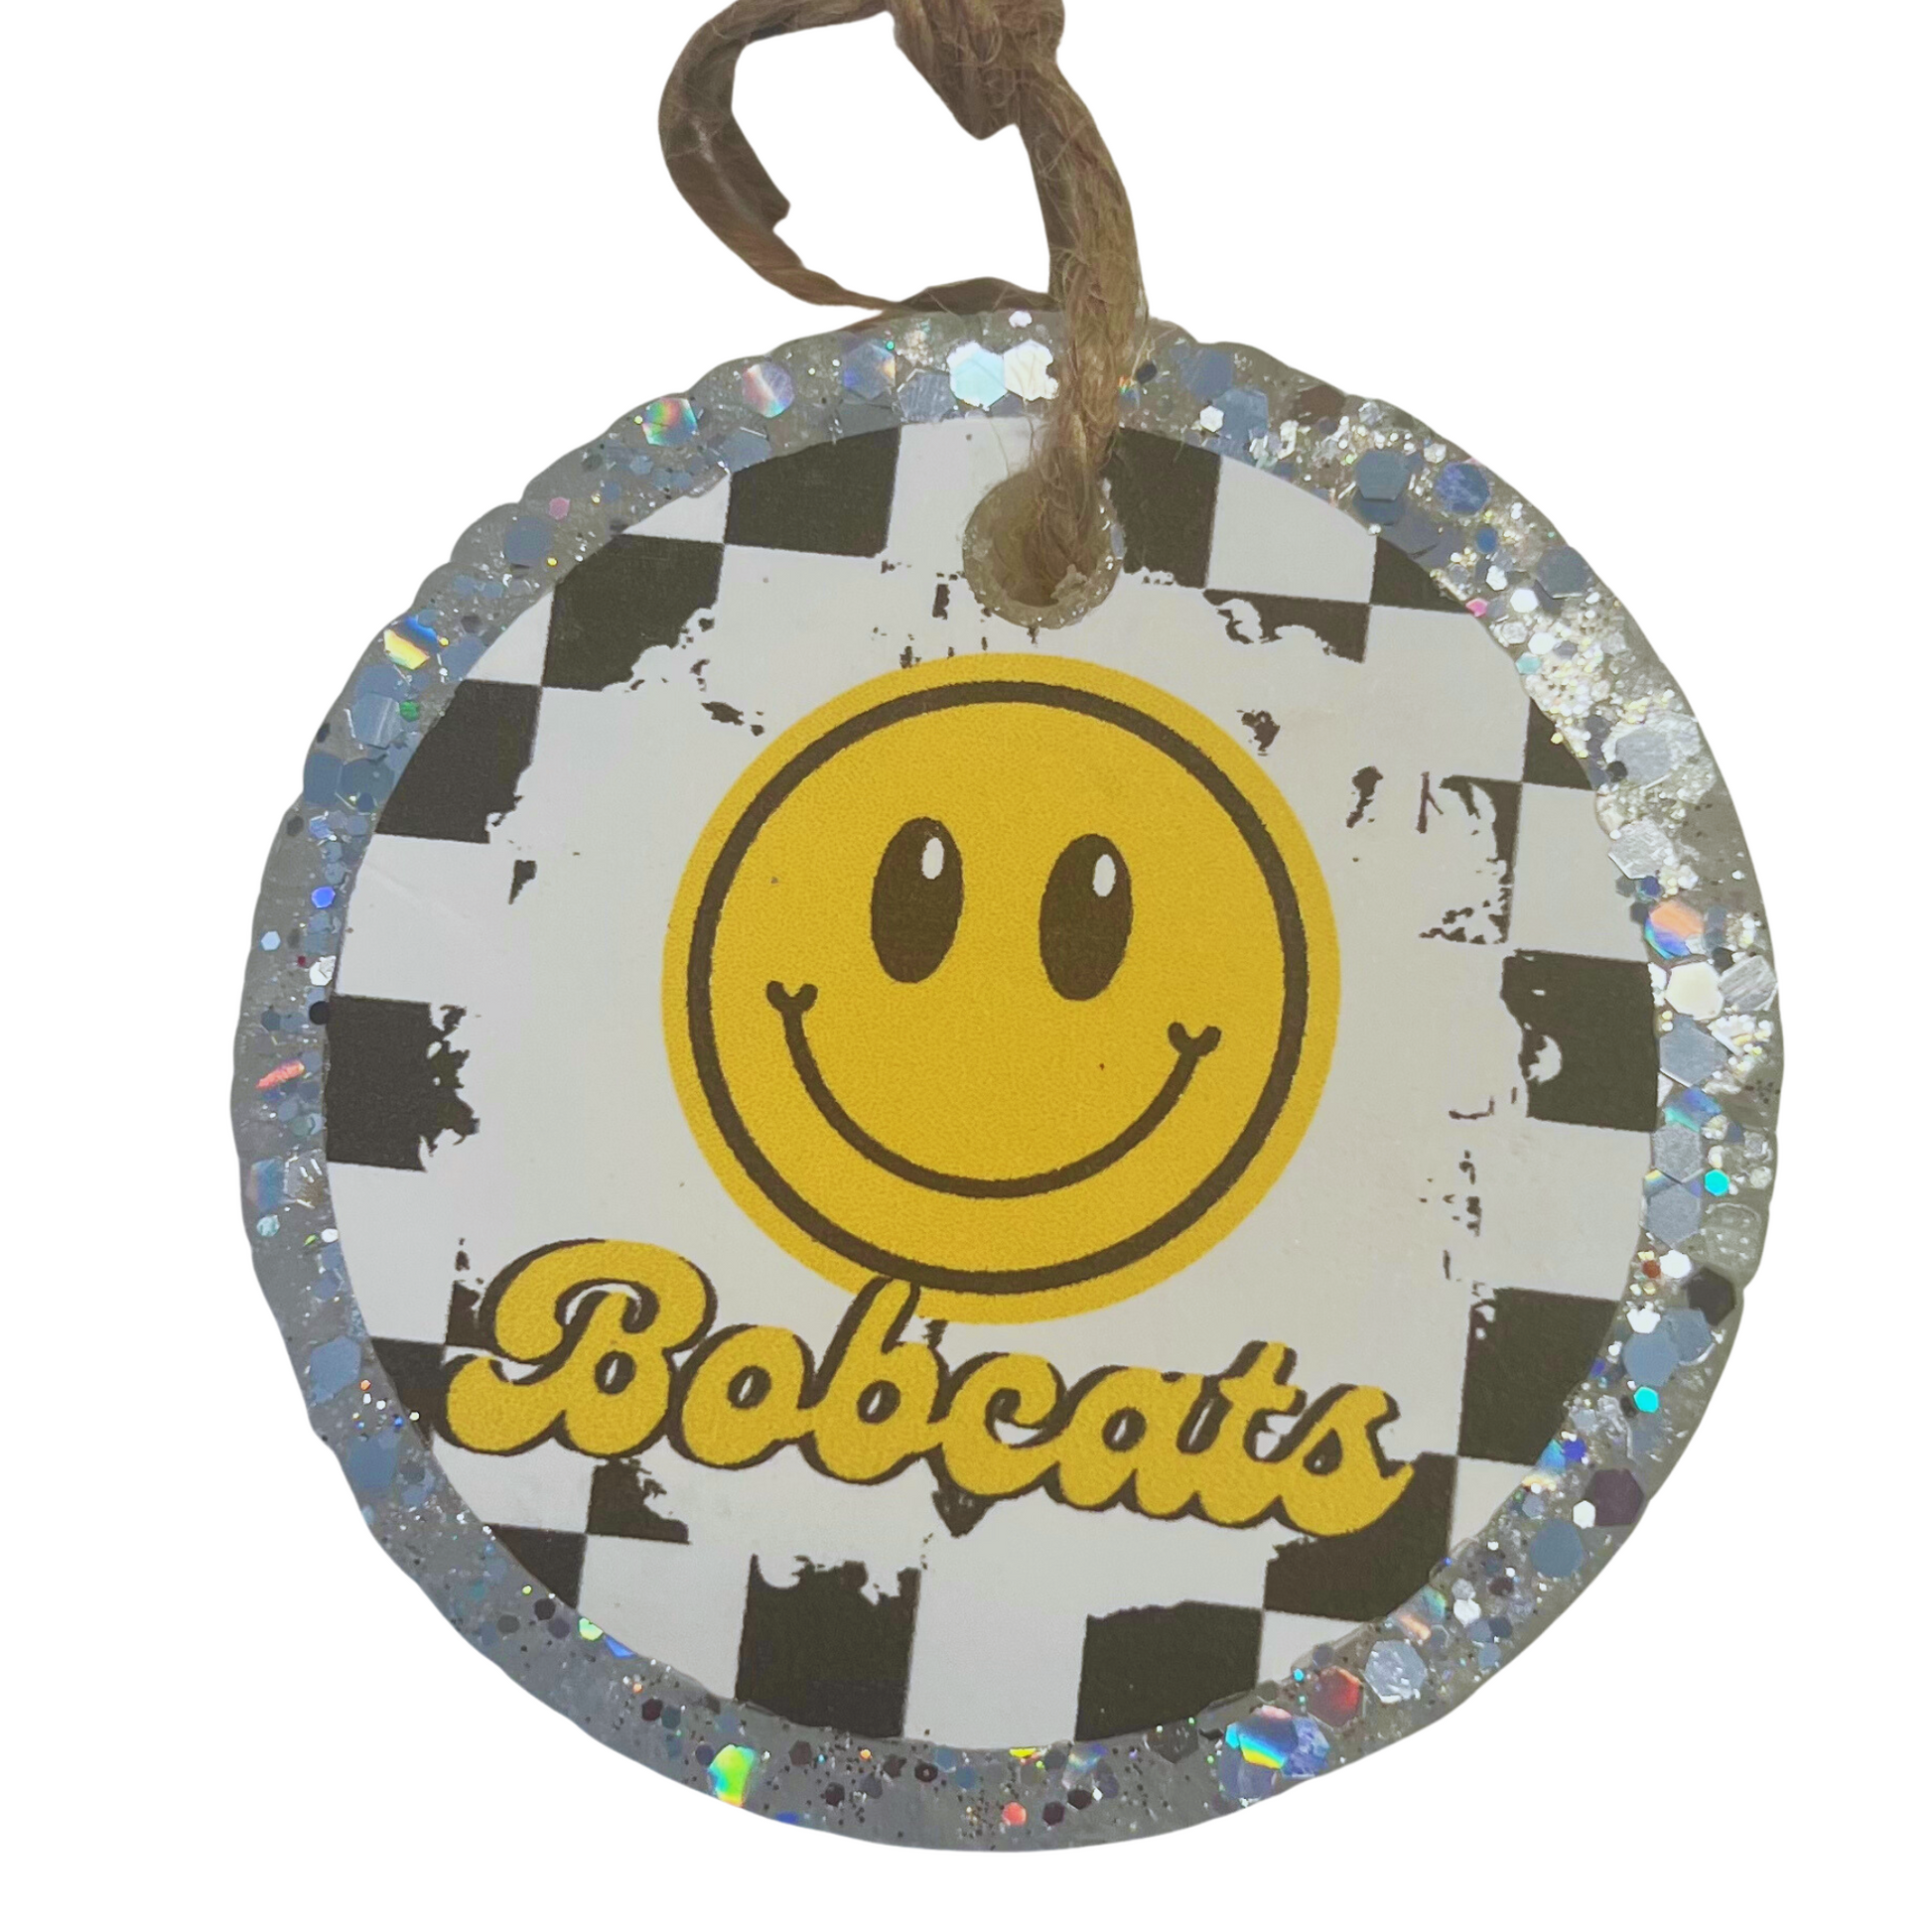 Bobcat themed car freshie with Smiley face. Available in Volcano and Sweet Grace scent